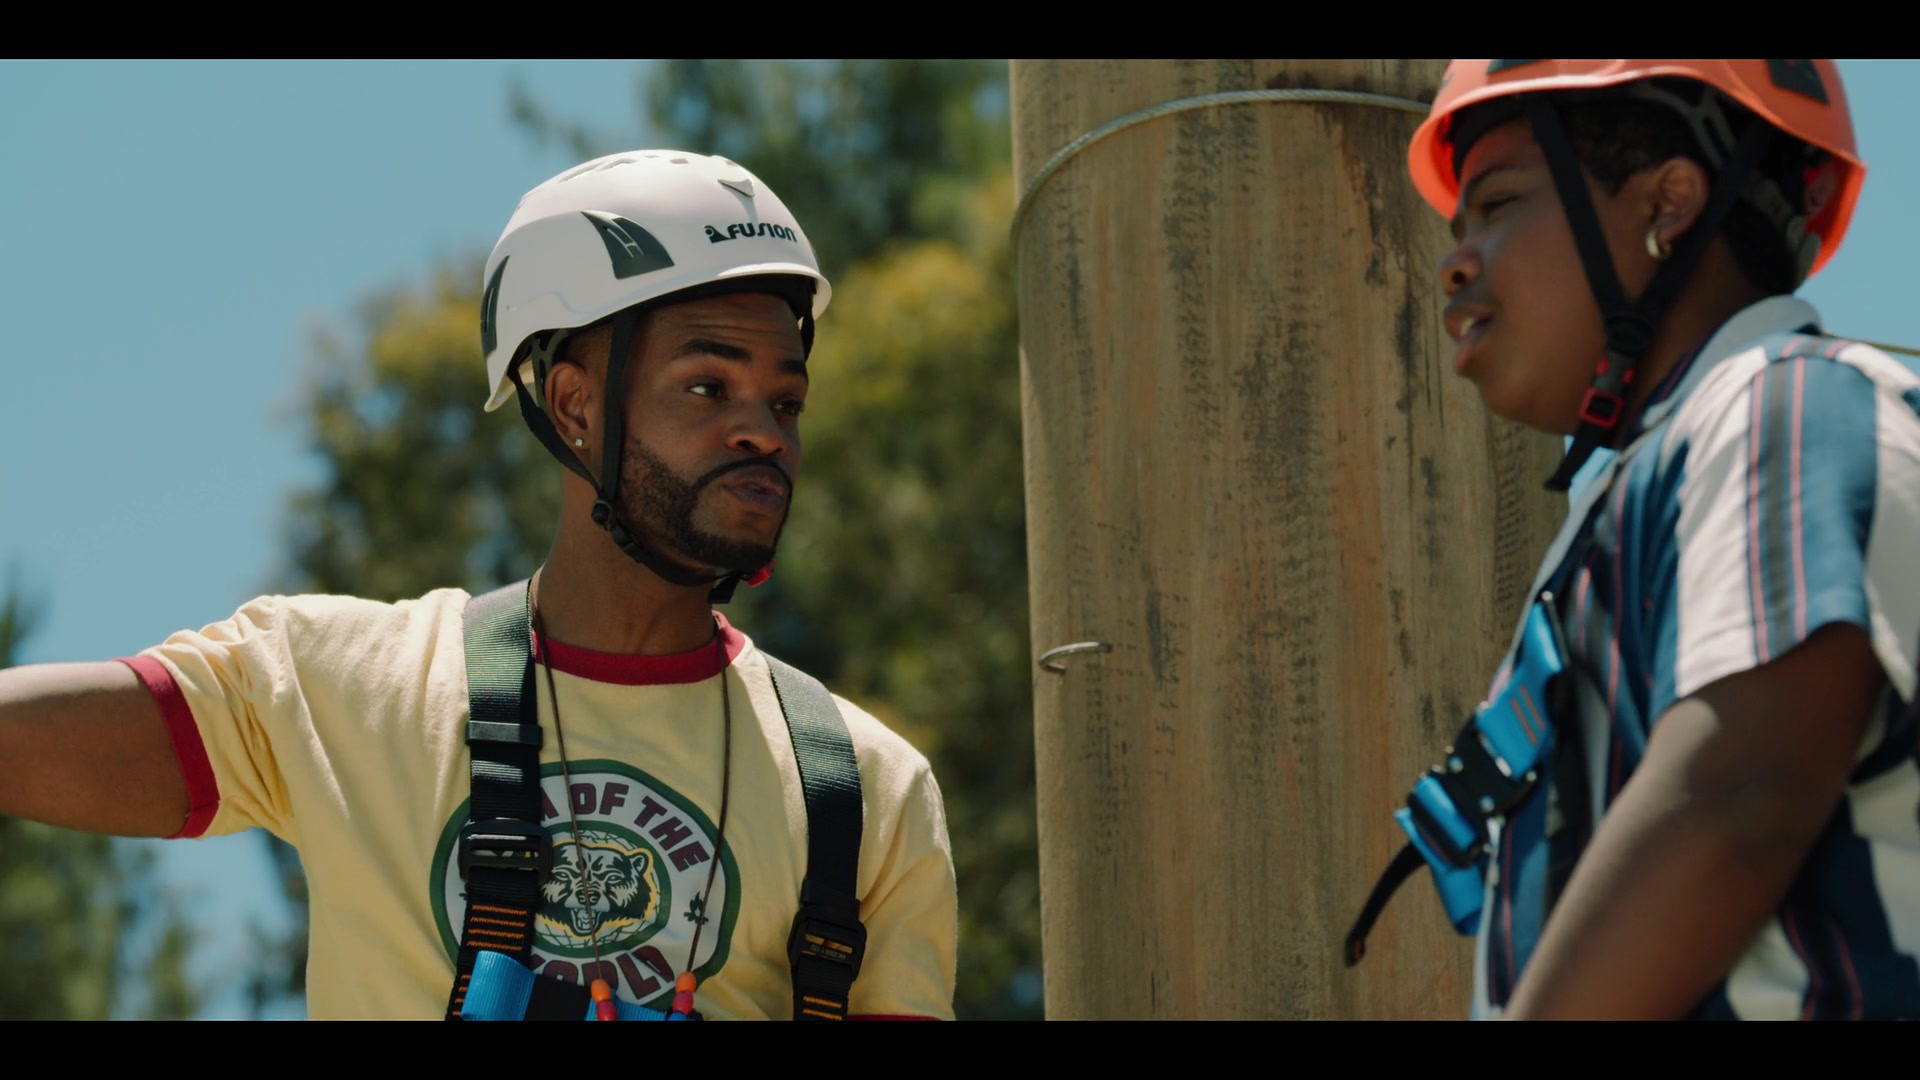 Fusion Climb White Helmet Worn By King Bach In Rim Of The World (2019)